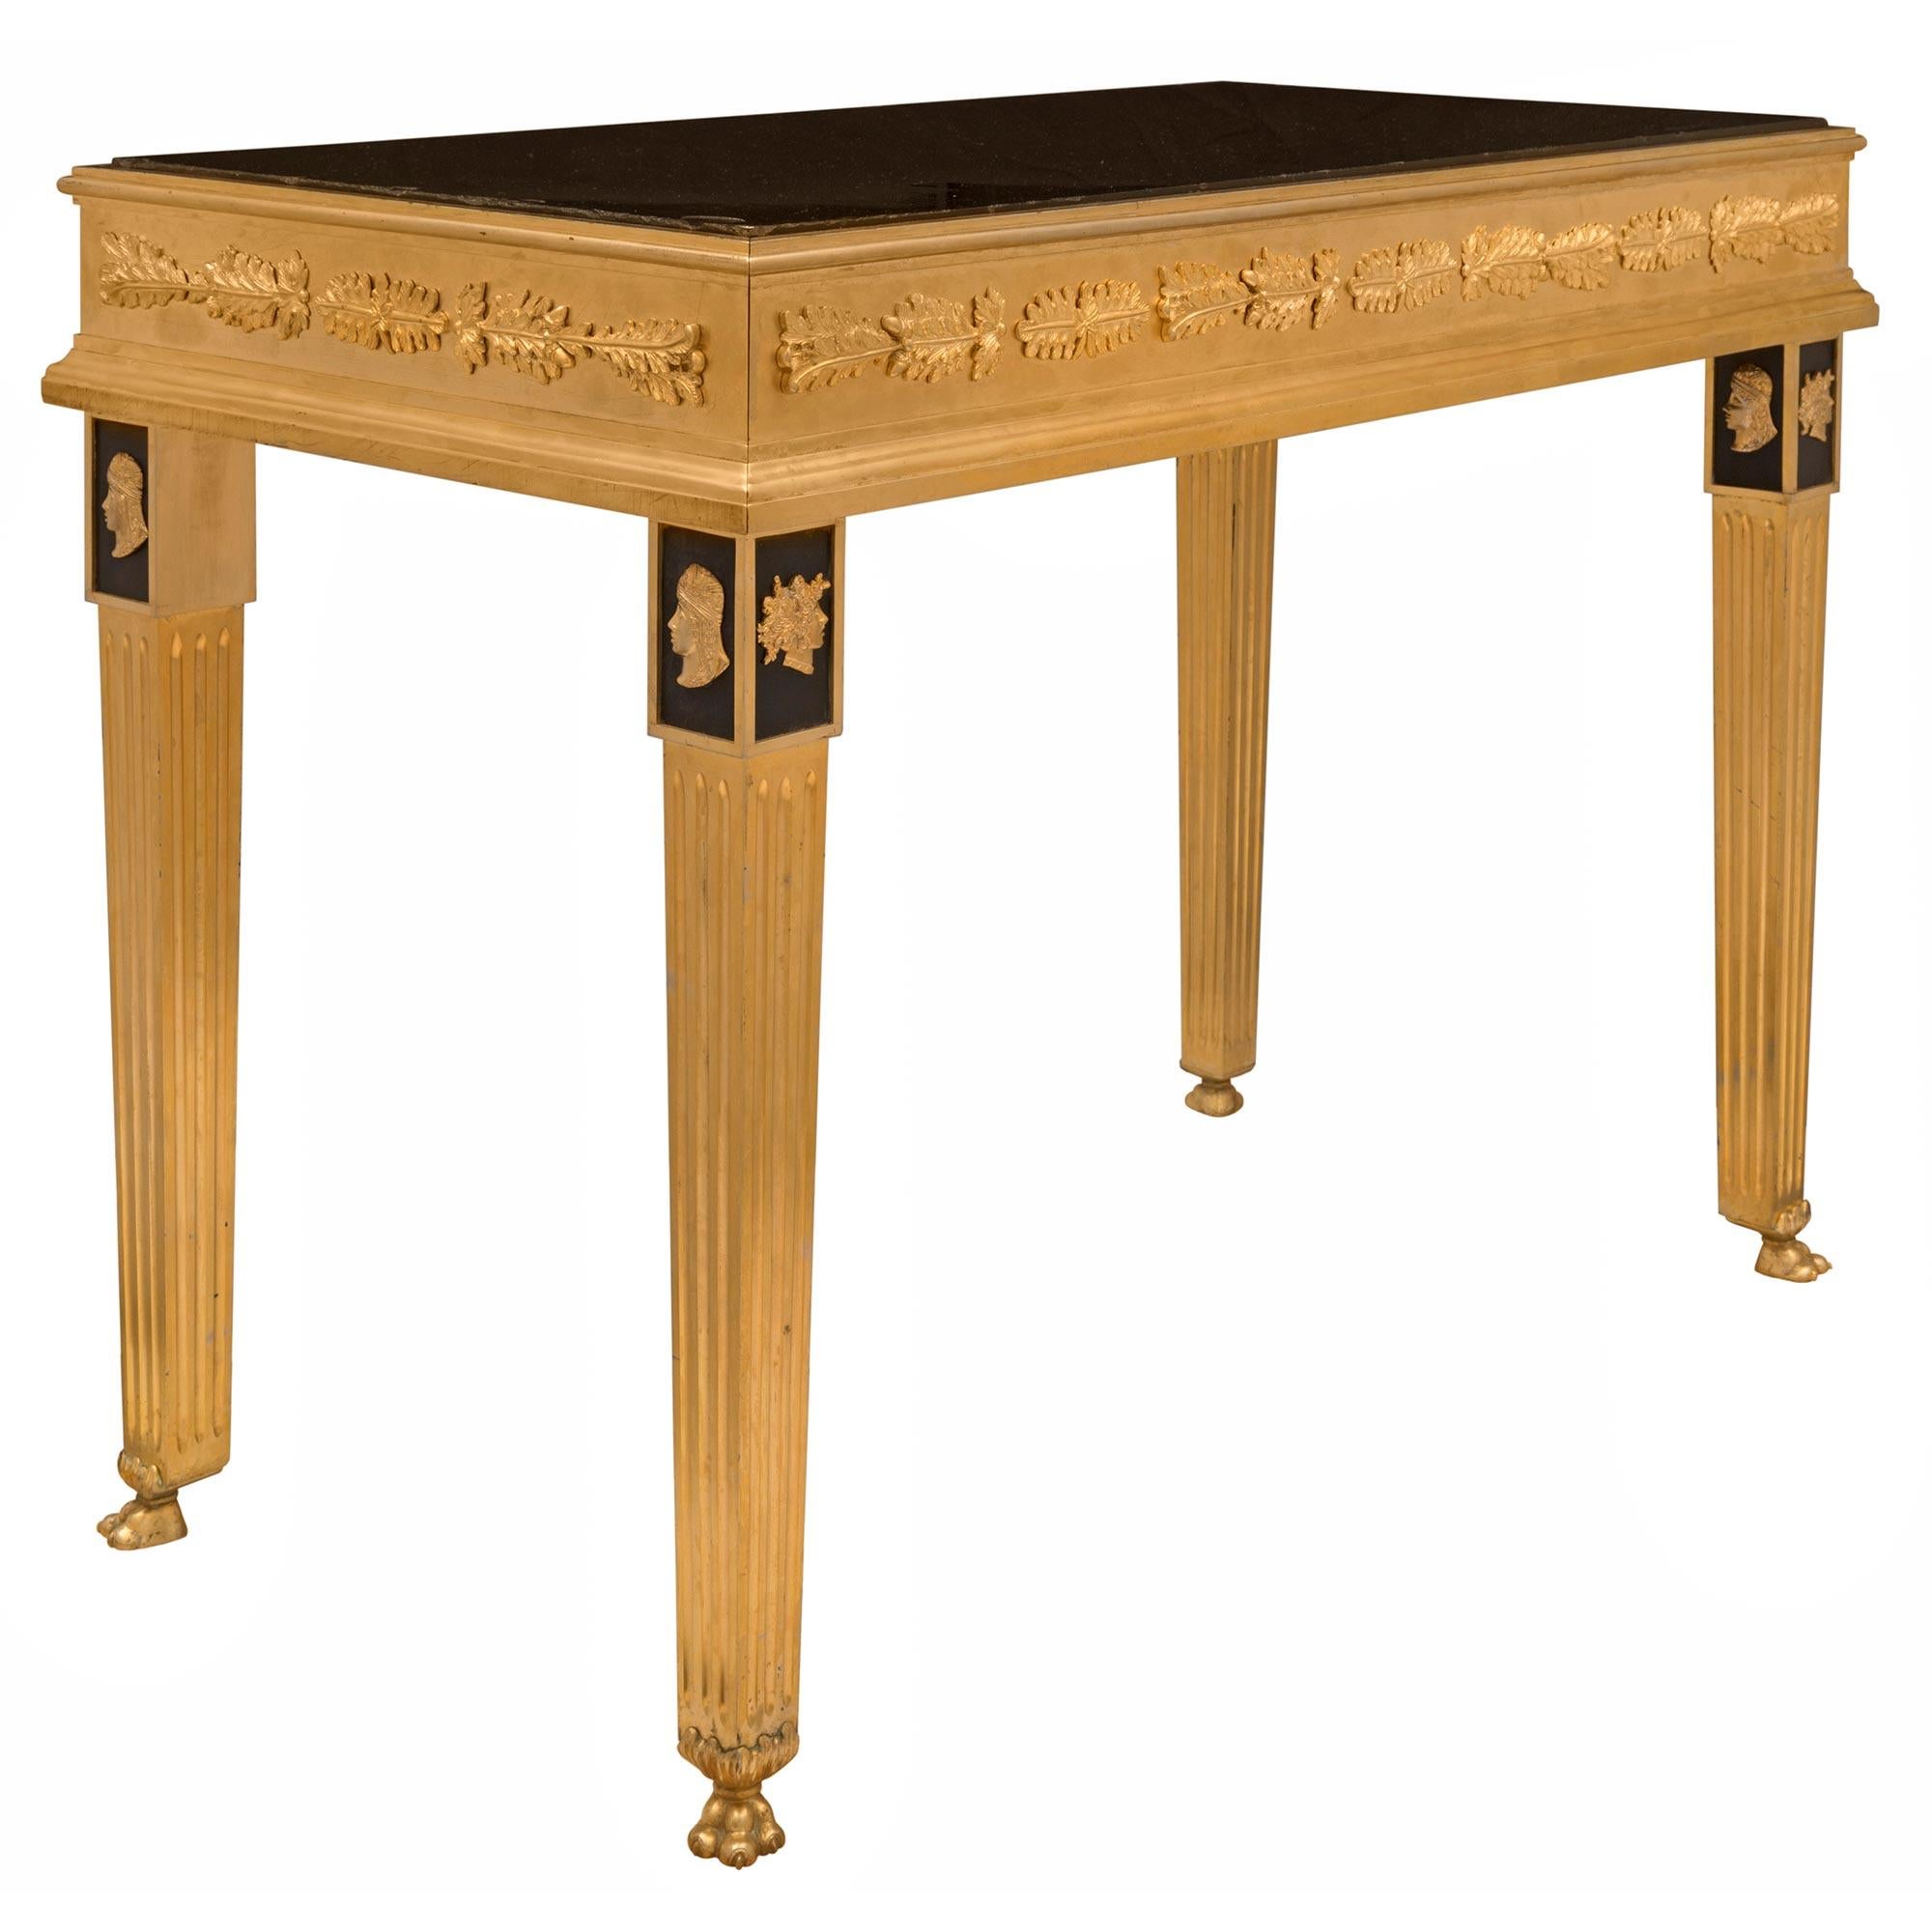 Italian 19th Century Neoclassical Style Solid Ormolu Center Table In Good Condition For Sale In West Palm Beach, FL